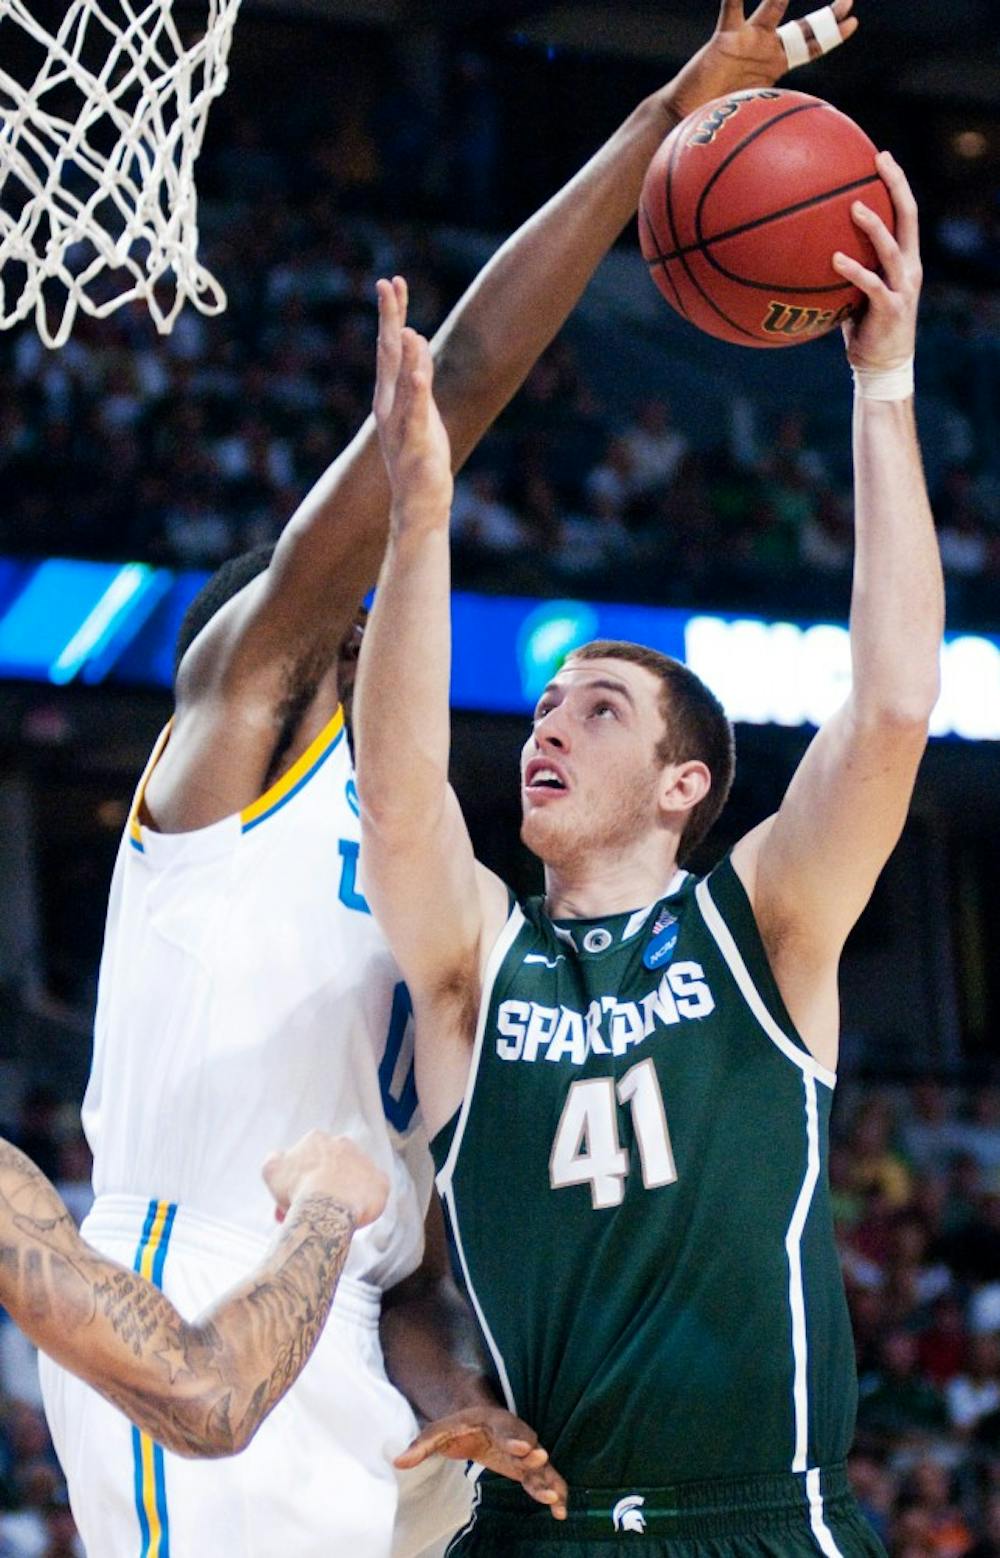 Sophomore center Garrick Sherman is blocked by UCLA center Antthony Stover during the first half. The Spartans lost to the Bruins, 78-76, in the second round of the 2011 NCAA Division 1 Men's Basketball Championship on Thursday night at St. Pete Times Forum in Tampa, Fla. Josh Radtke/The State News